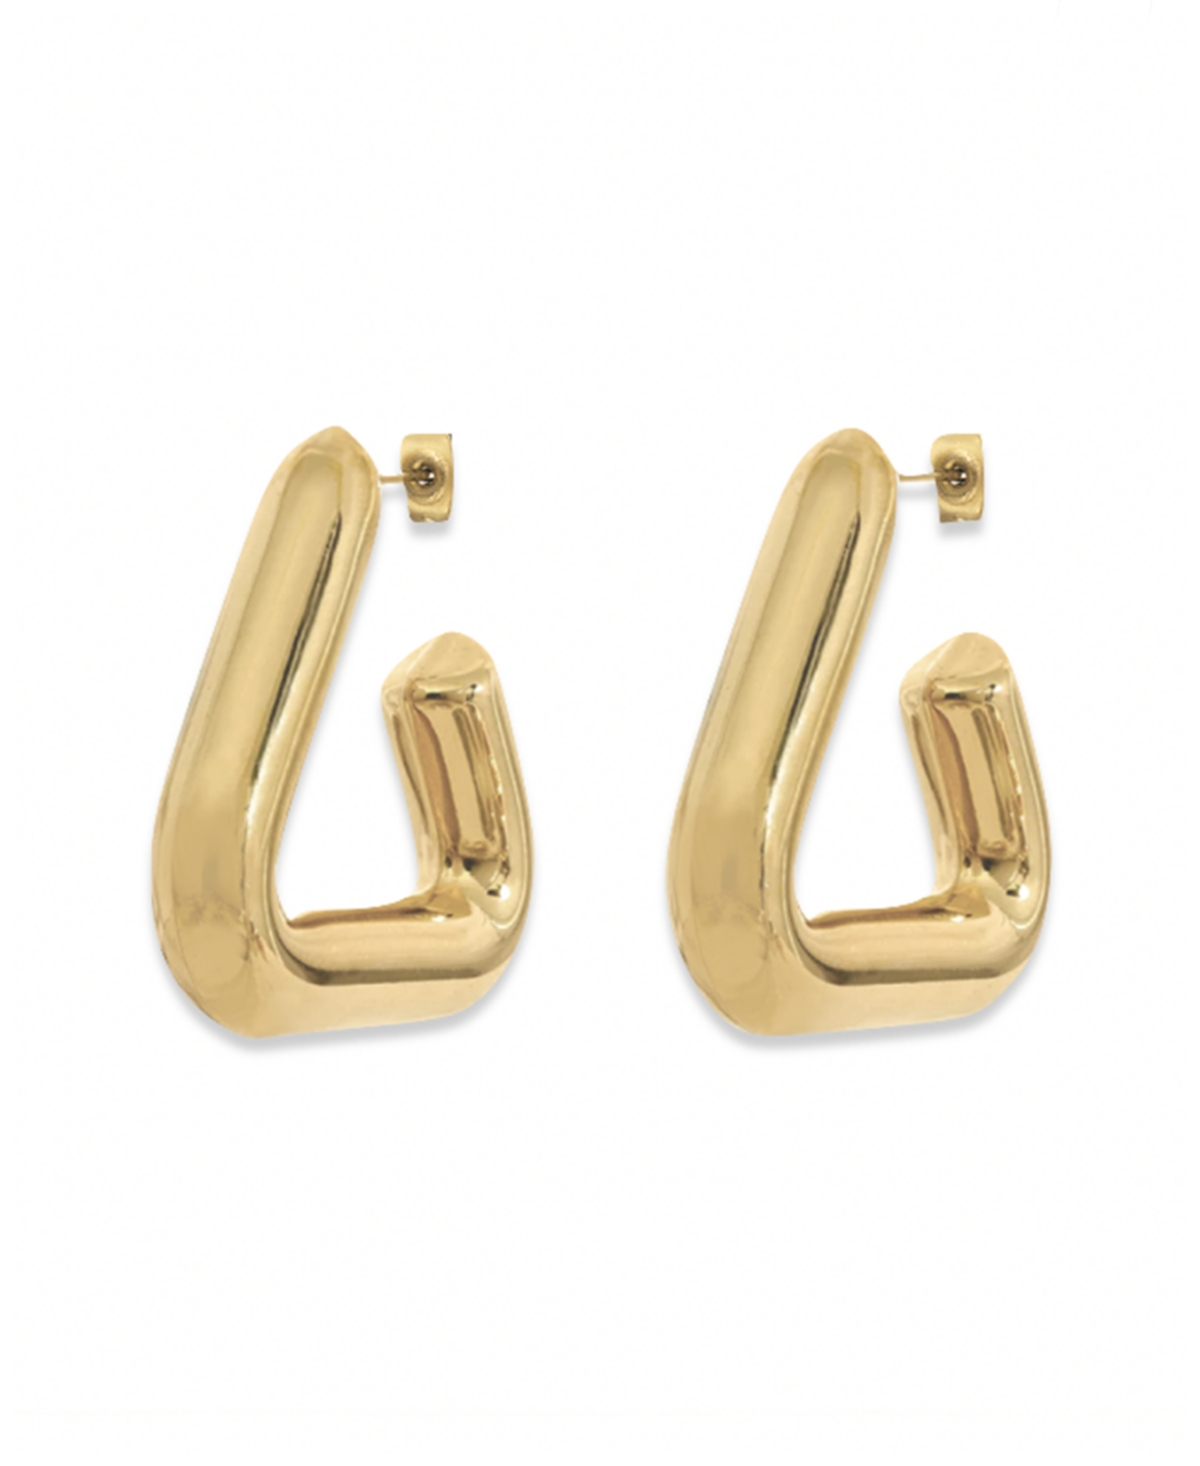 Gold-Tone Polished Non-Tarnish Triangle Hoop Earrings, 1.40" - Gold